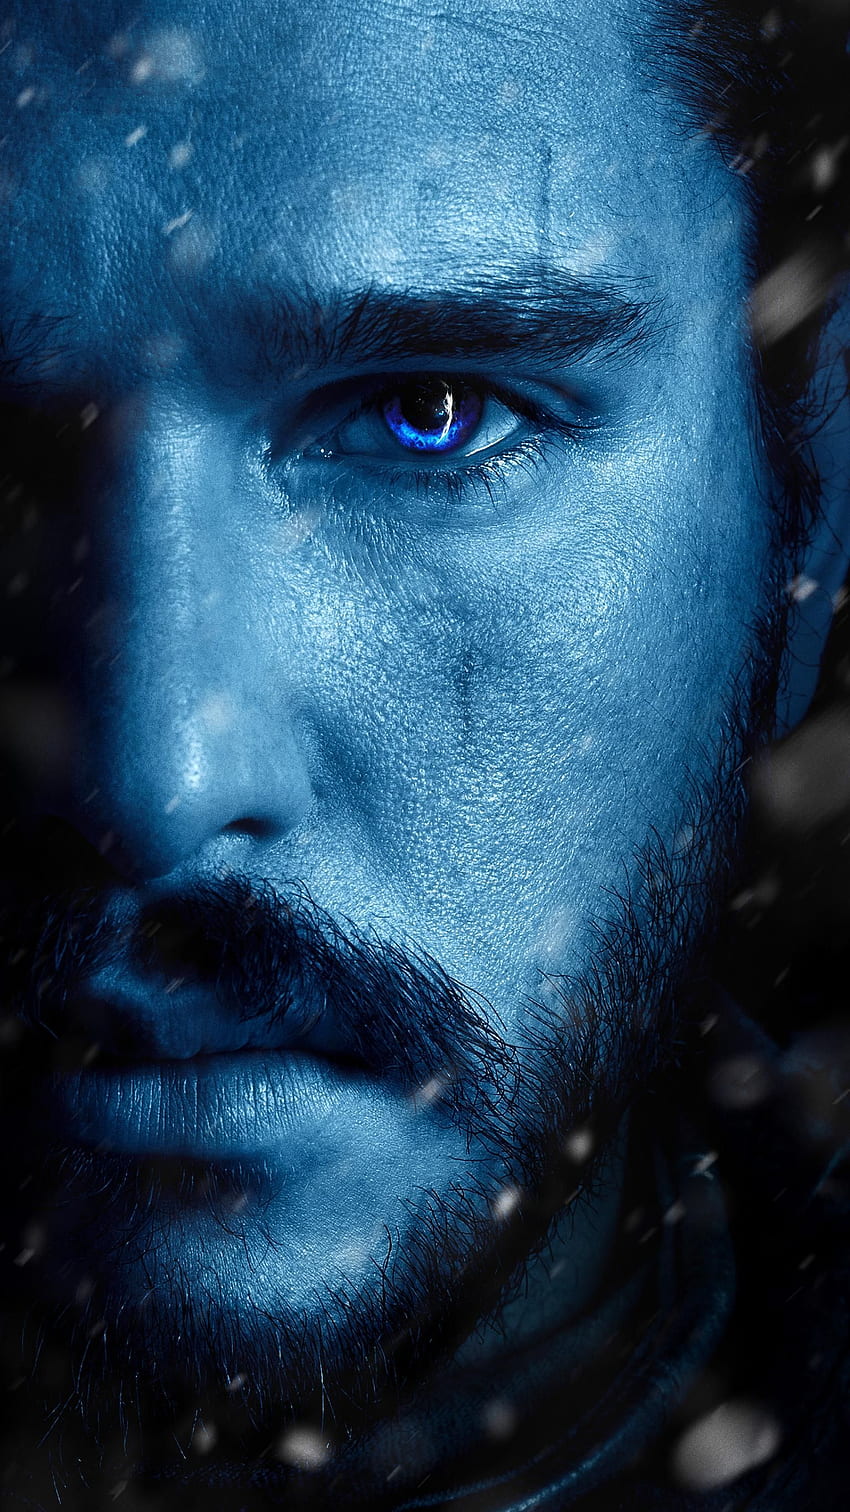 Jon Snow with dragon from Game of thrones Wallpaper 4k Ultra HD ID:4921